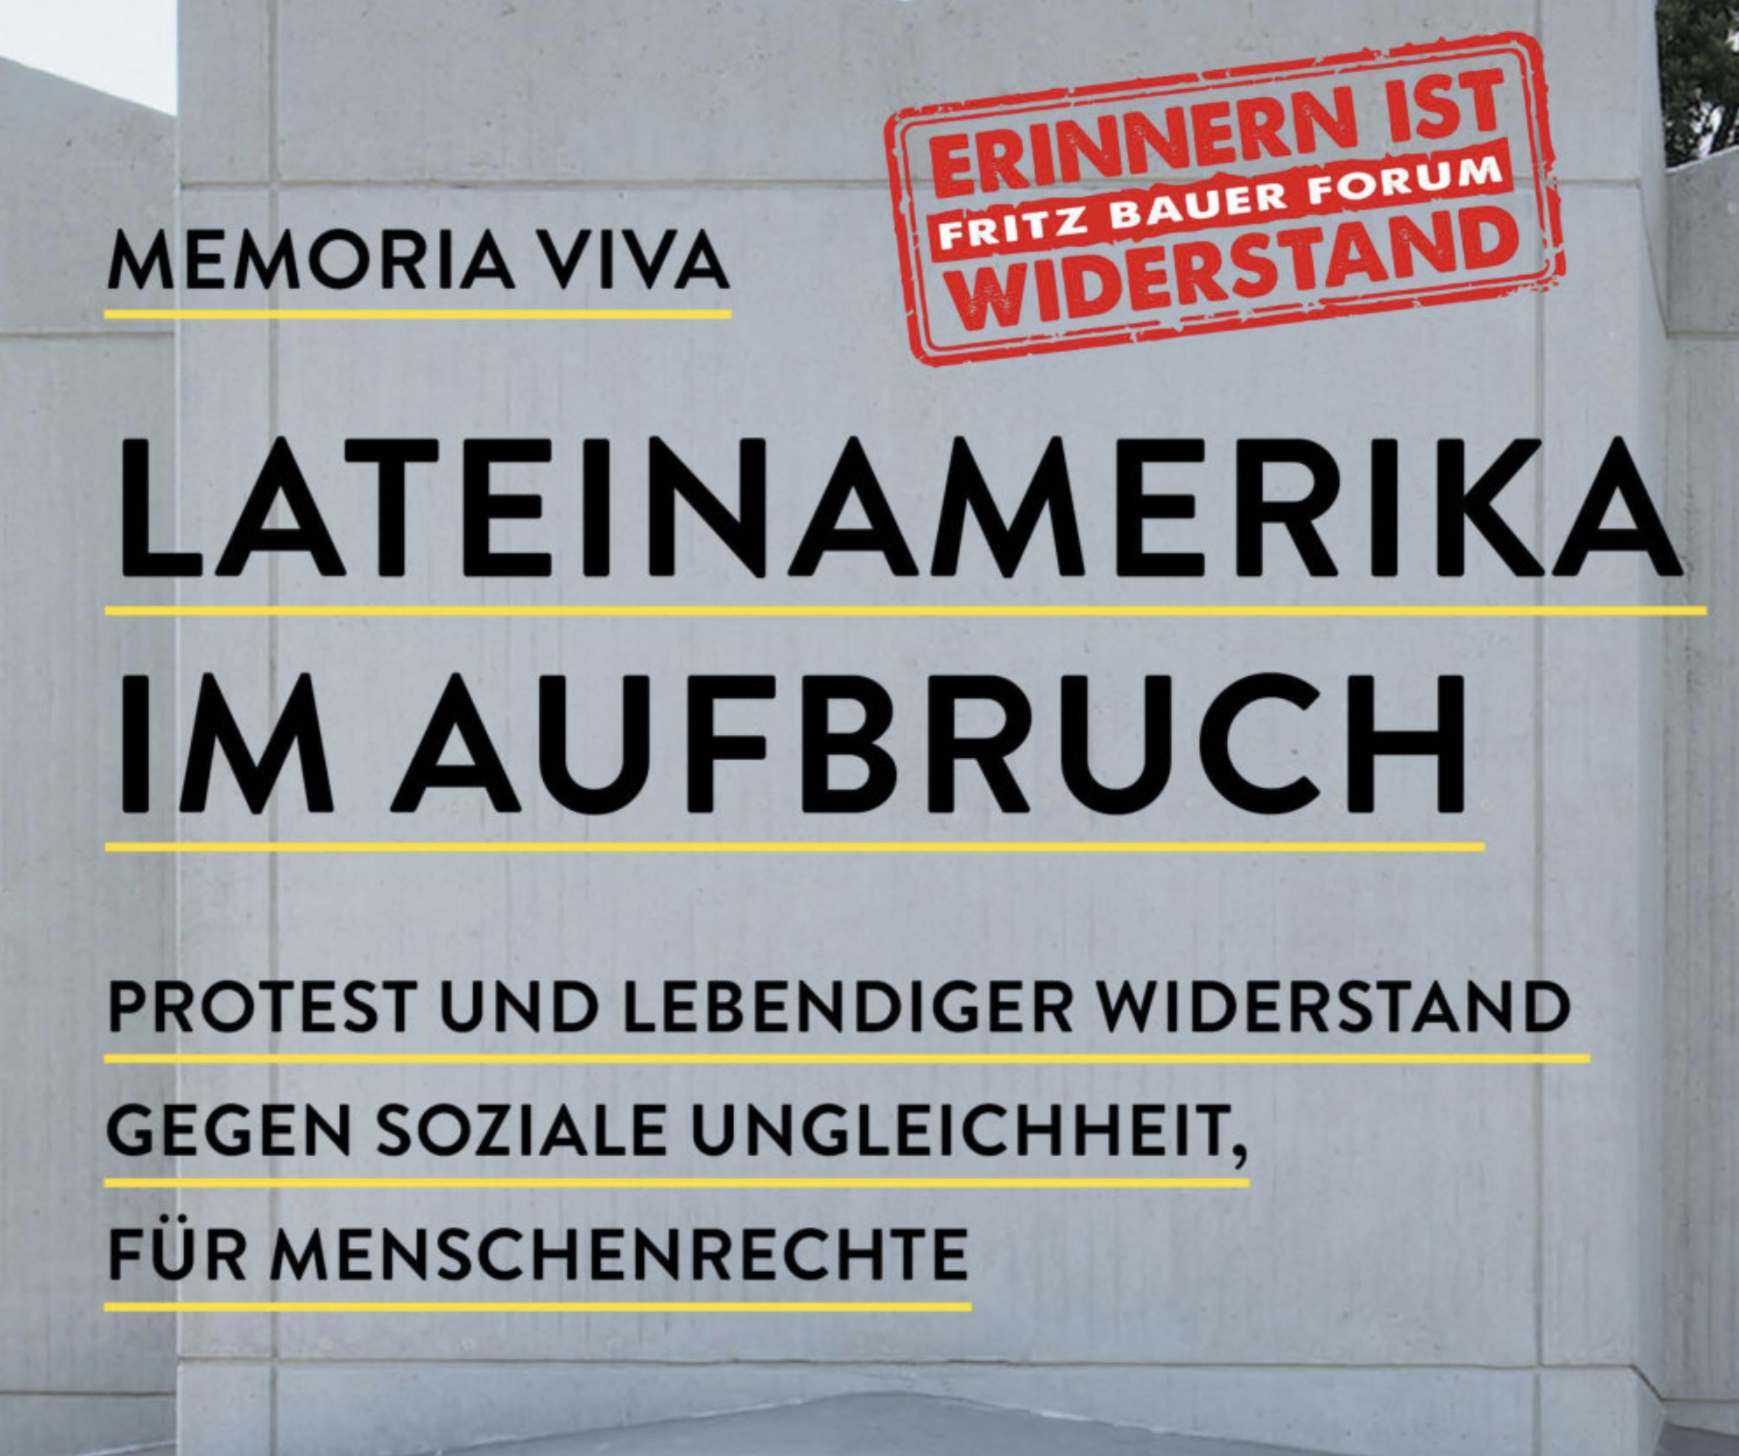 You are currently viewing Memoria viva – Lateinamerika im Aufbruch